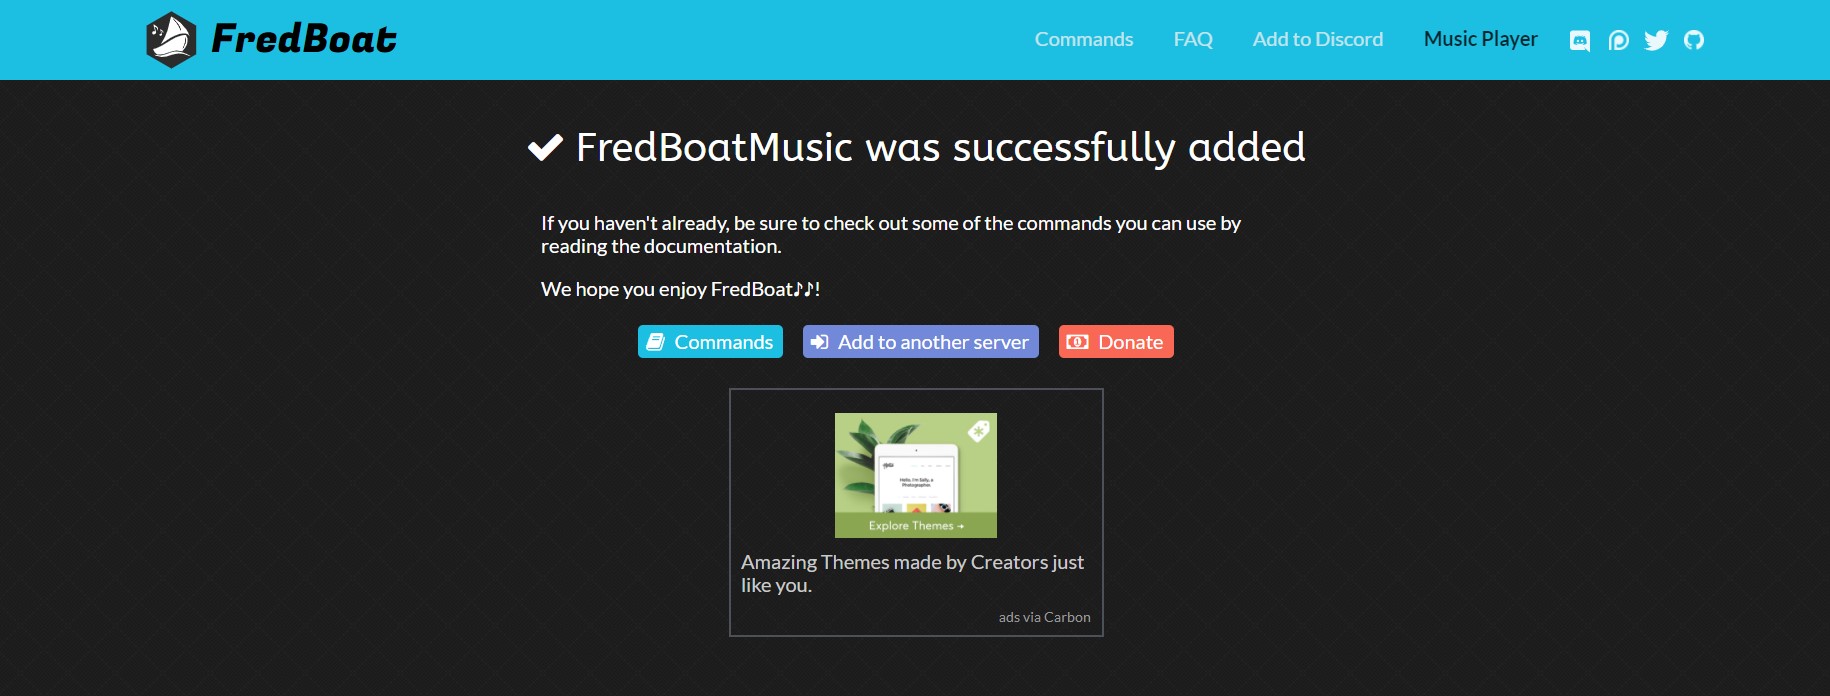 FredBoat added to the server